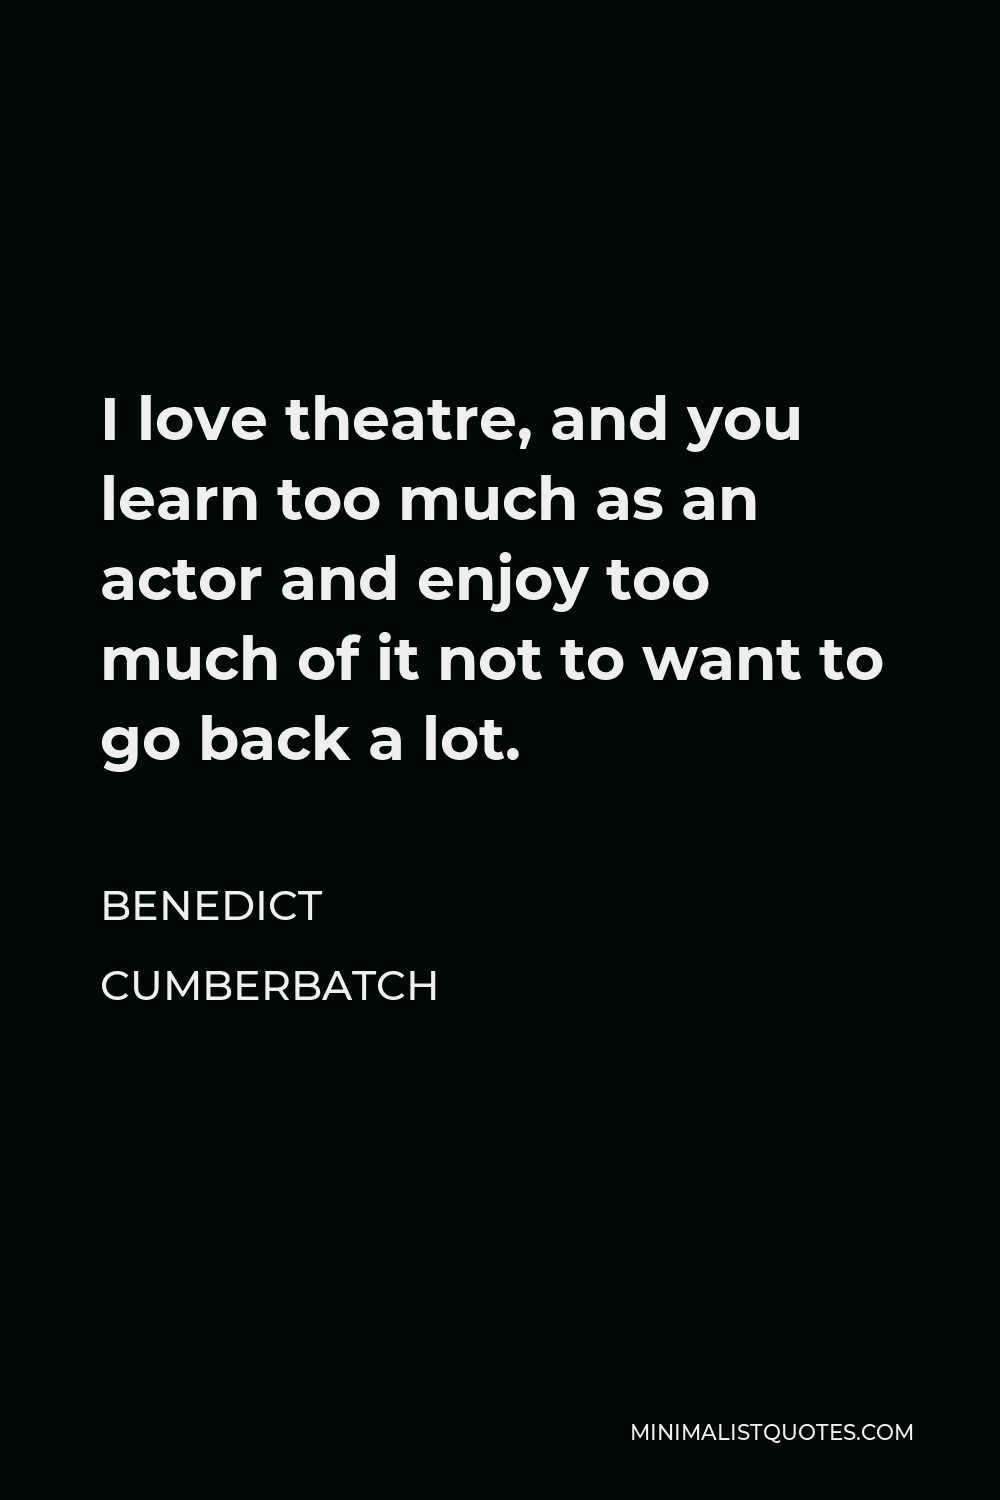 Benedict Cumberbatch Quote - I love theatre, and you learn too much as an actor and enjoy too much of it not to want to go back a lot.